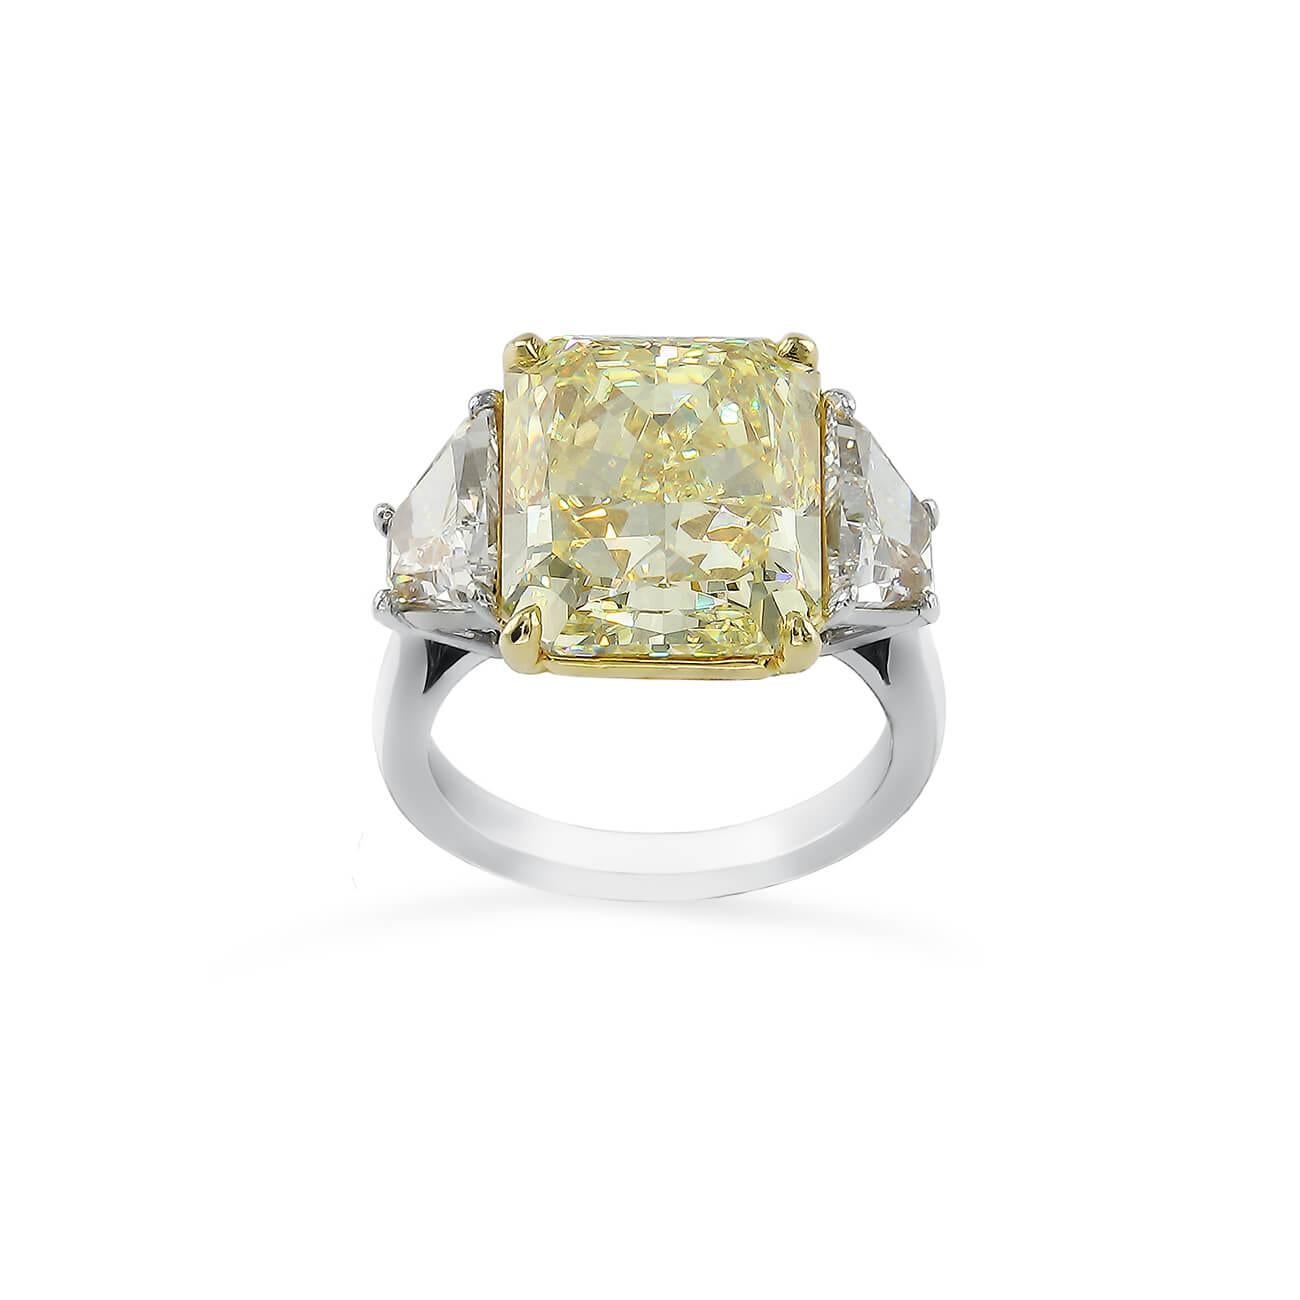 Cartier ring
Ring Size: 6
Platinum and 18K yellow gold
10.18CT fancy yellow radiant cut GIA FY/VS1 diamond
2.07ctw F-G/VS1-VS2 trapezoid brilliant white diamond
Includes original box, Cartier valuation report, GIA Certificate for fancy yellow diamond